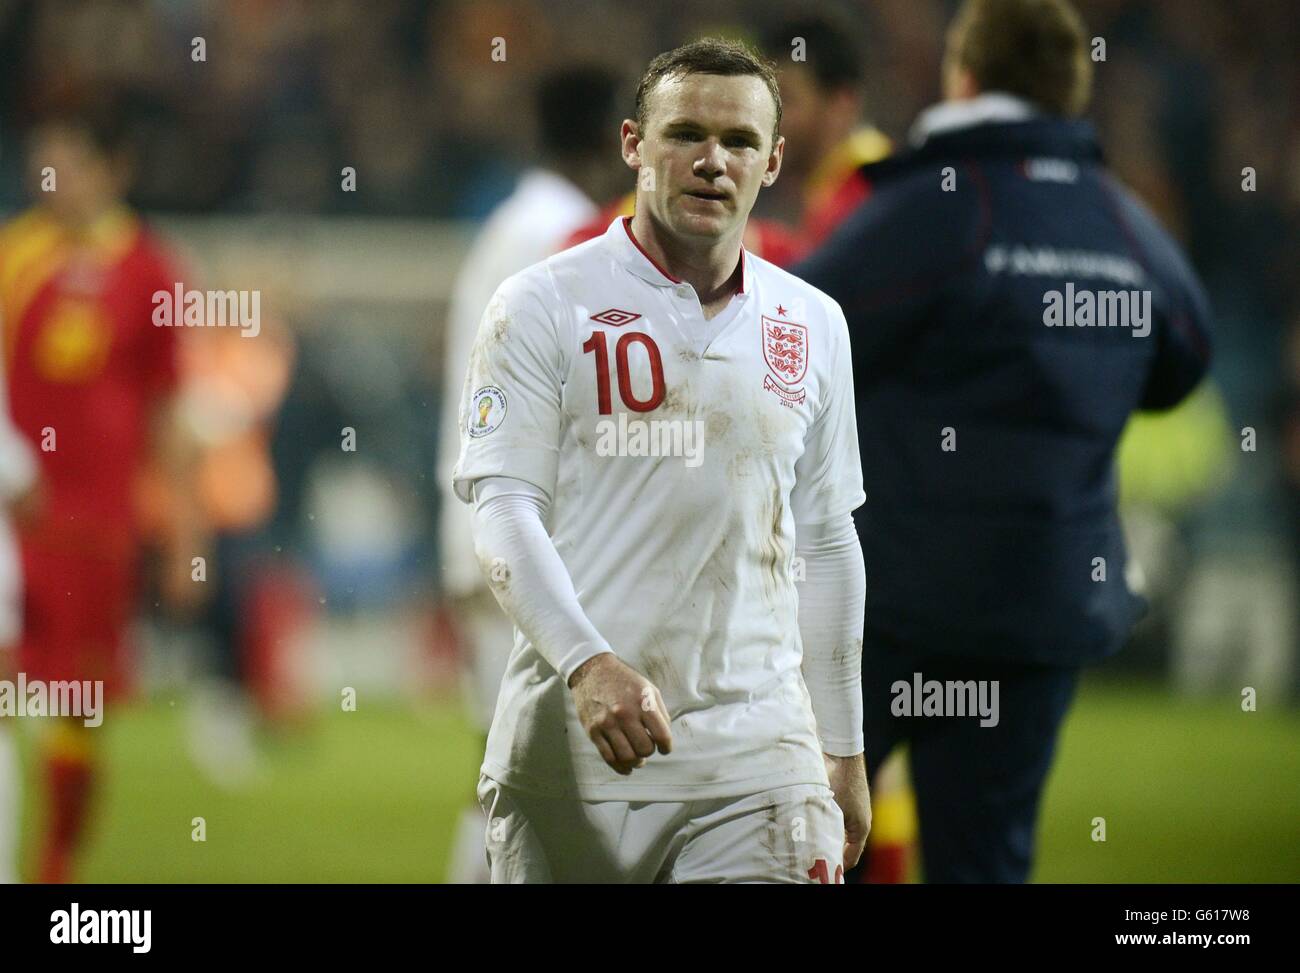 Soccer - 2014 World Cup Qualifier - Group H - Montenegro v England - City Stadium. England's Wayne Rooney leaves the pitch following the FIFA World Cup Qualifying, Group H match at the City Stadium, Podgorica, Montenegro. Stock Photo